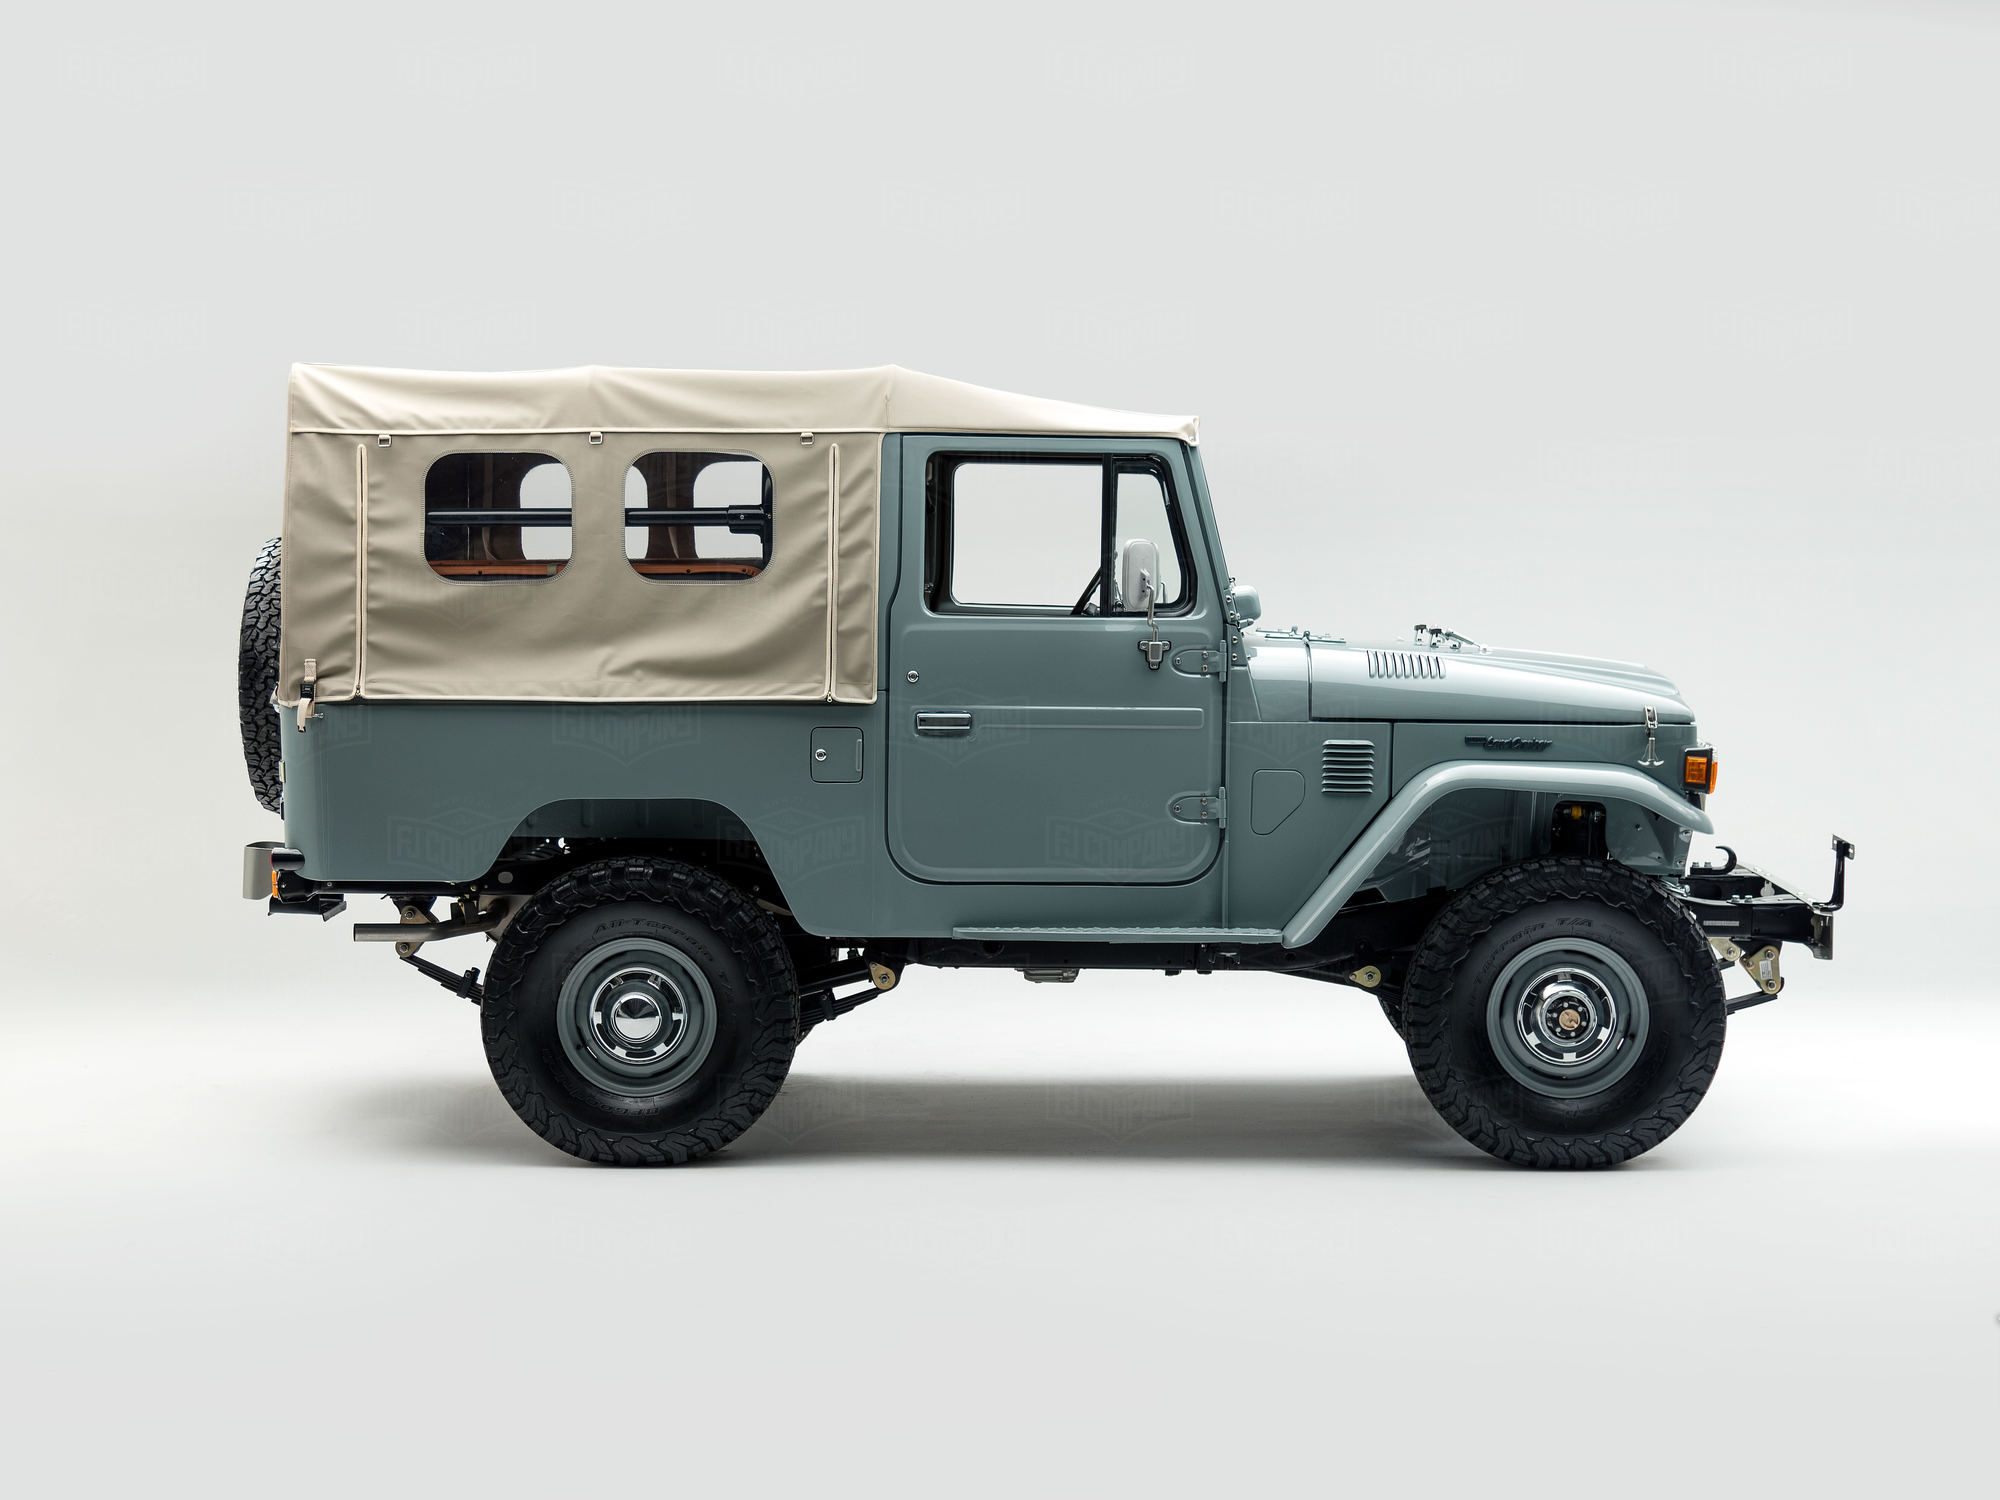 The perfect Land Cruiser for a seaside escape. 